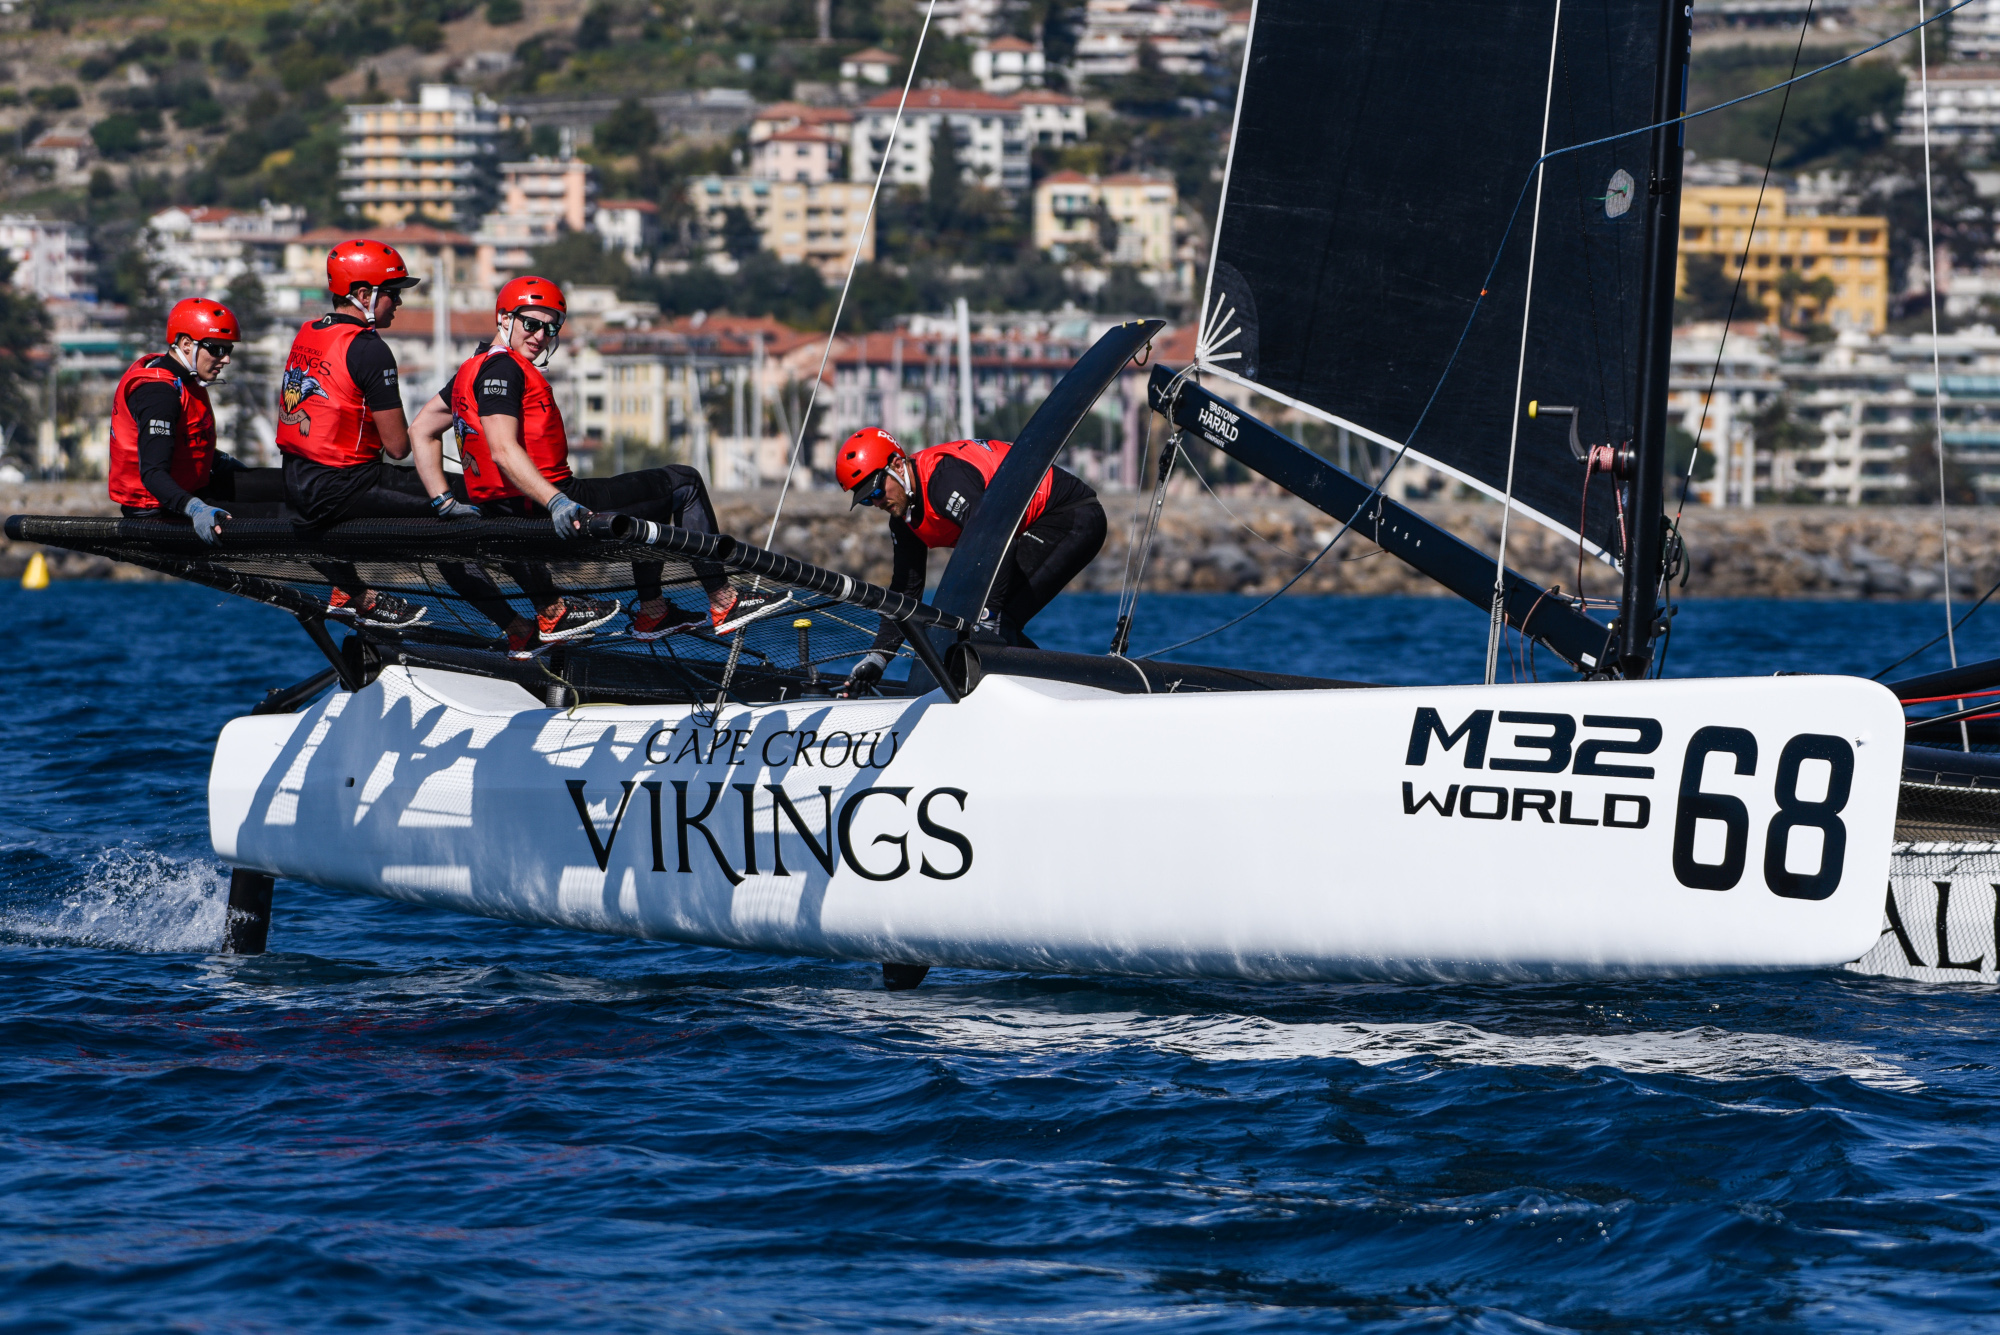  M32Catamaran  World Match Racing Tour 2019  Finals  Marstrand SWE  Day 4, Canfield ISV qualified for Semis